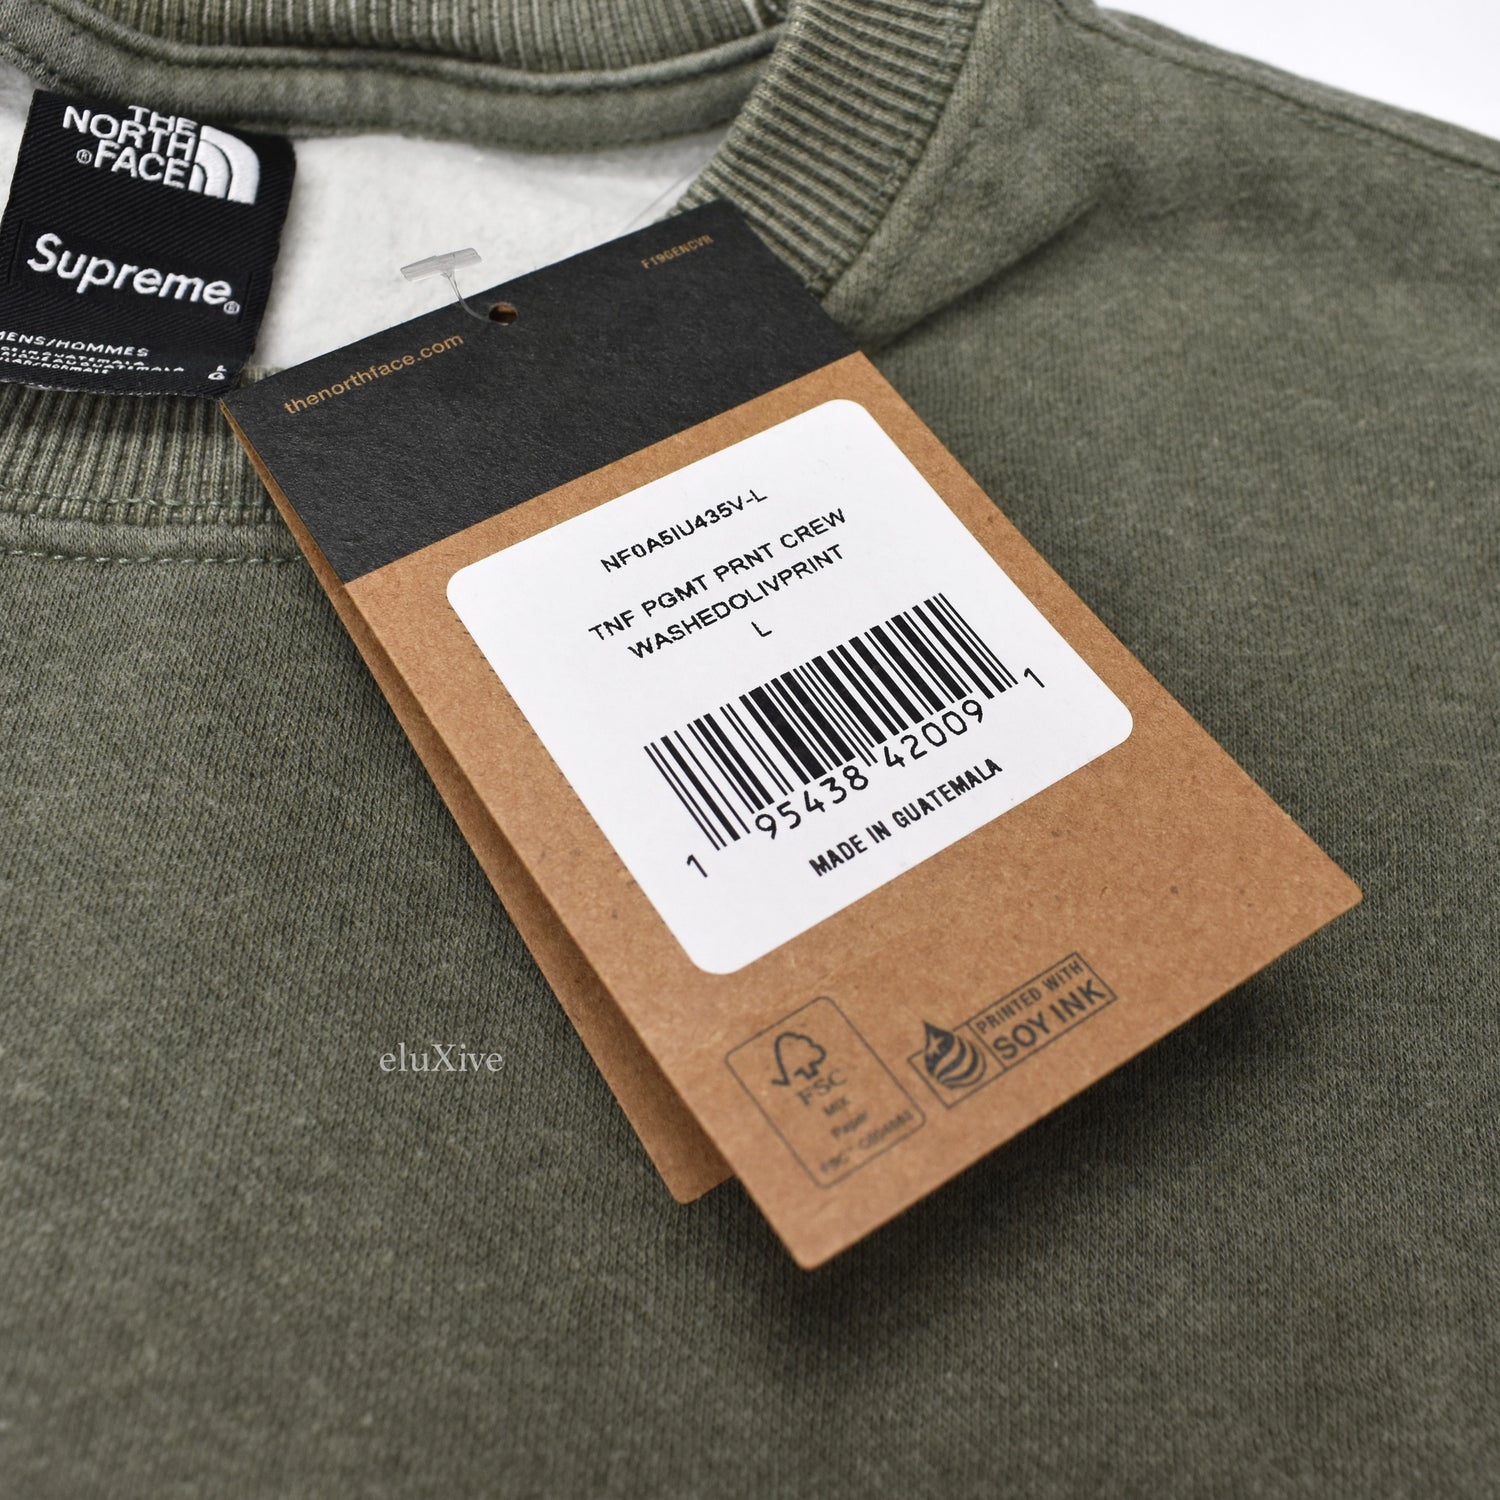 Supreme The North Face Pigment Printed Hooded Sweatshirt Brown